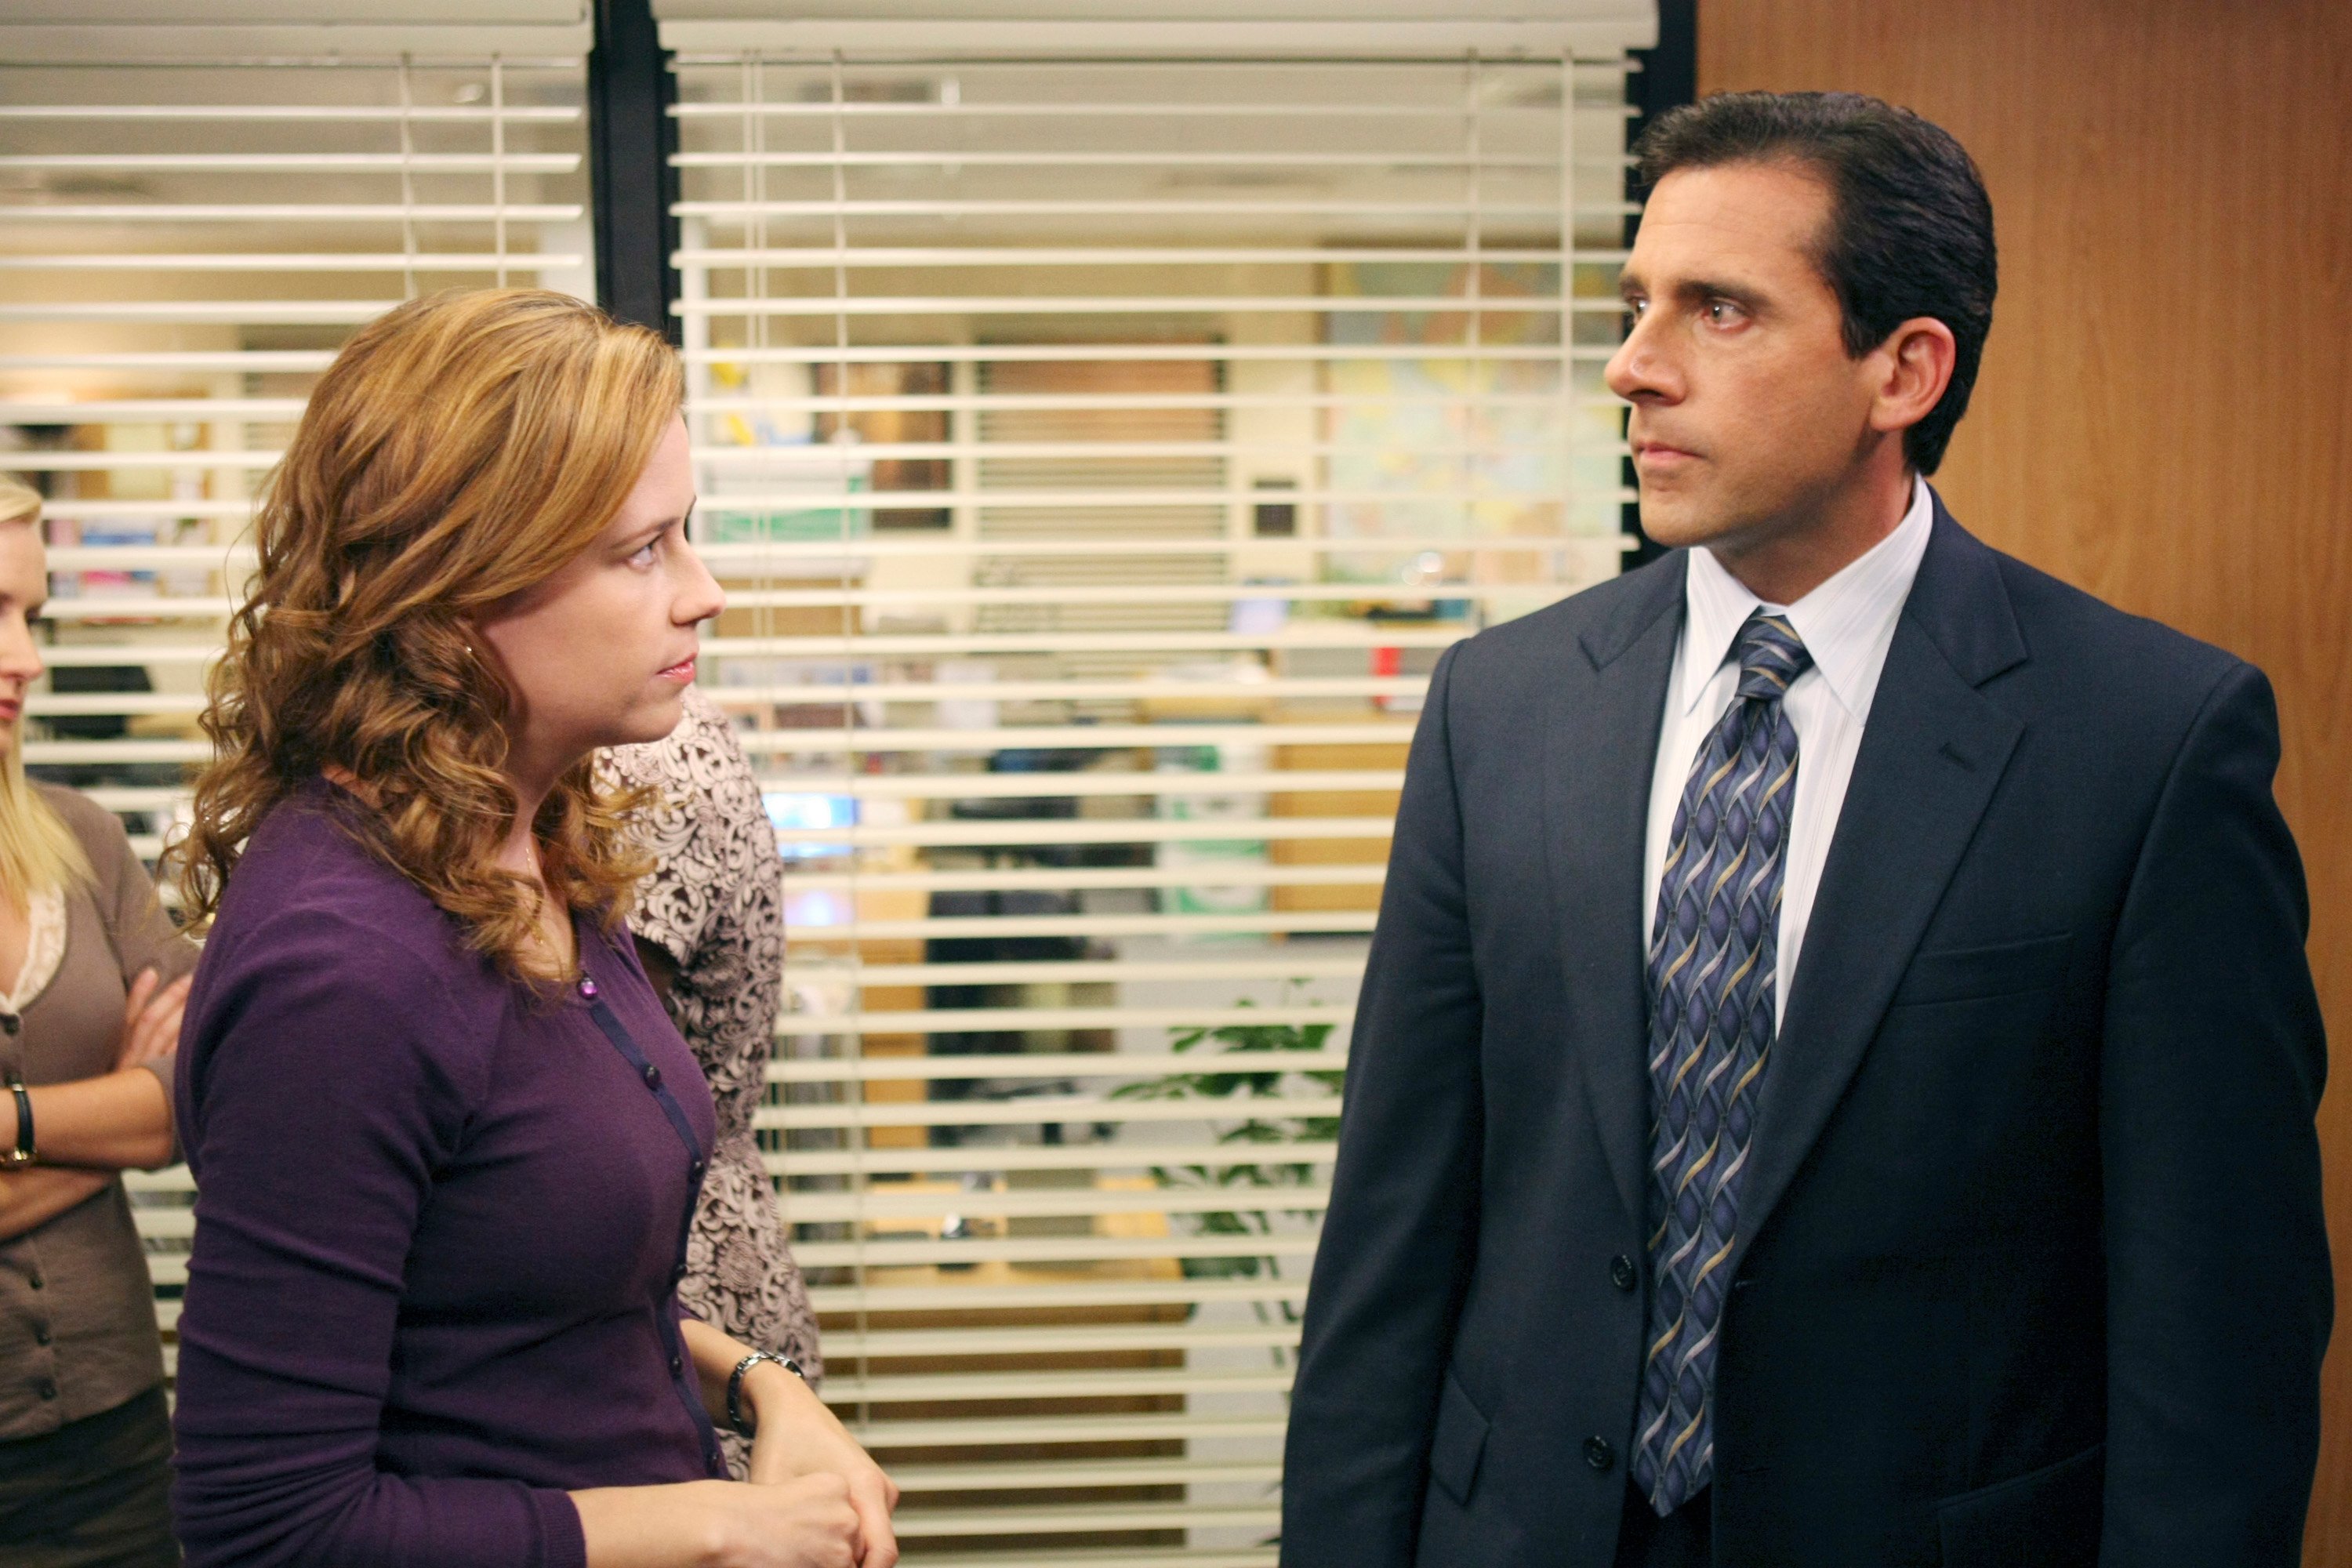 Jenna Fischer and Steve Carell on set of The Office